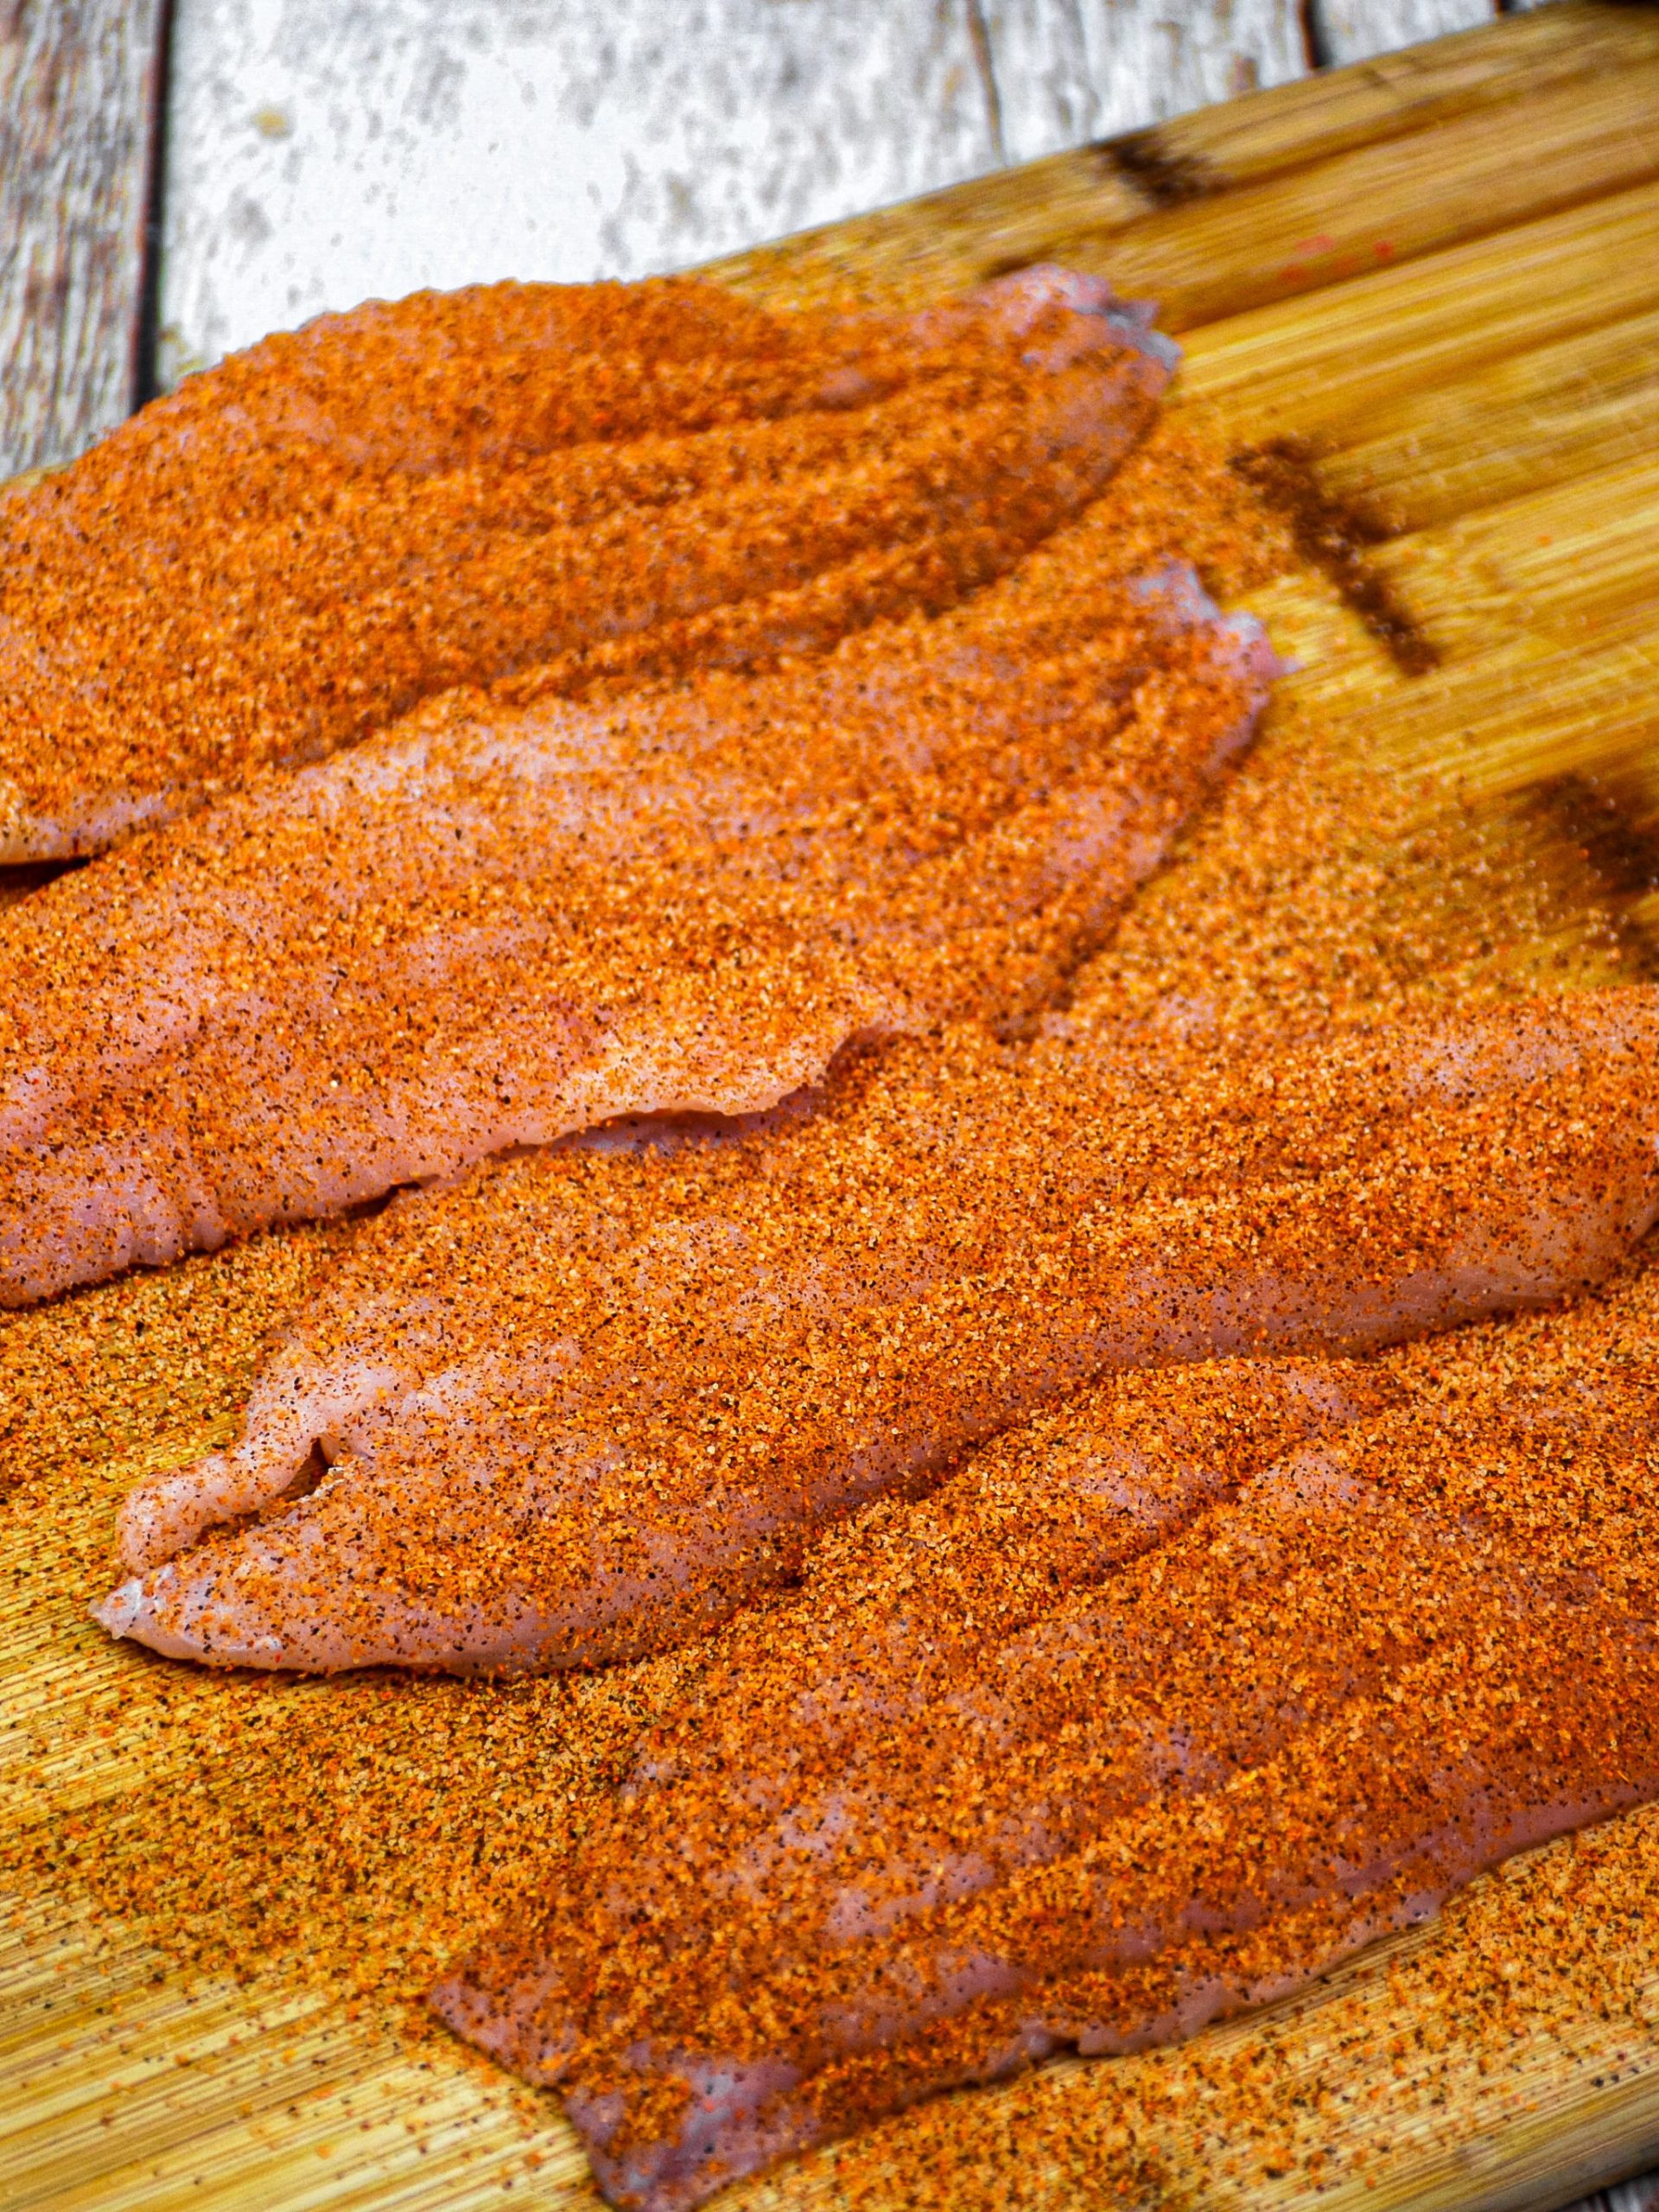 Brush 1 tbsp. Melted butter onto the fish and then evenly sprinkle the cajun spice on all sides of the fish.